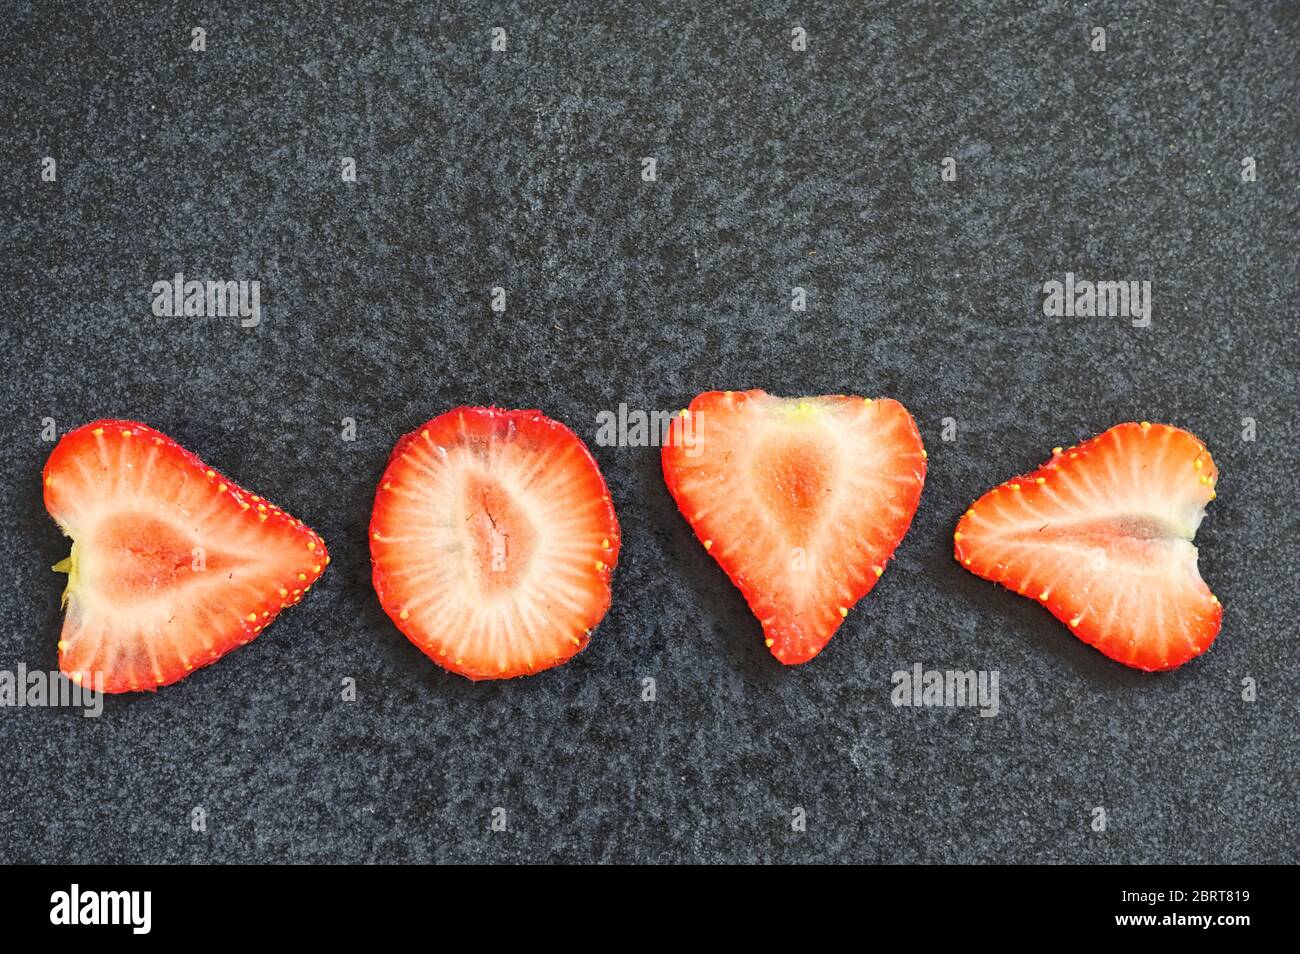 Love Letters Strawberry Slices Isolated On Black Background Stock Photo